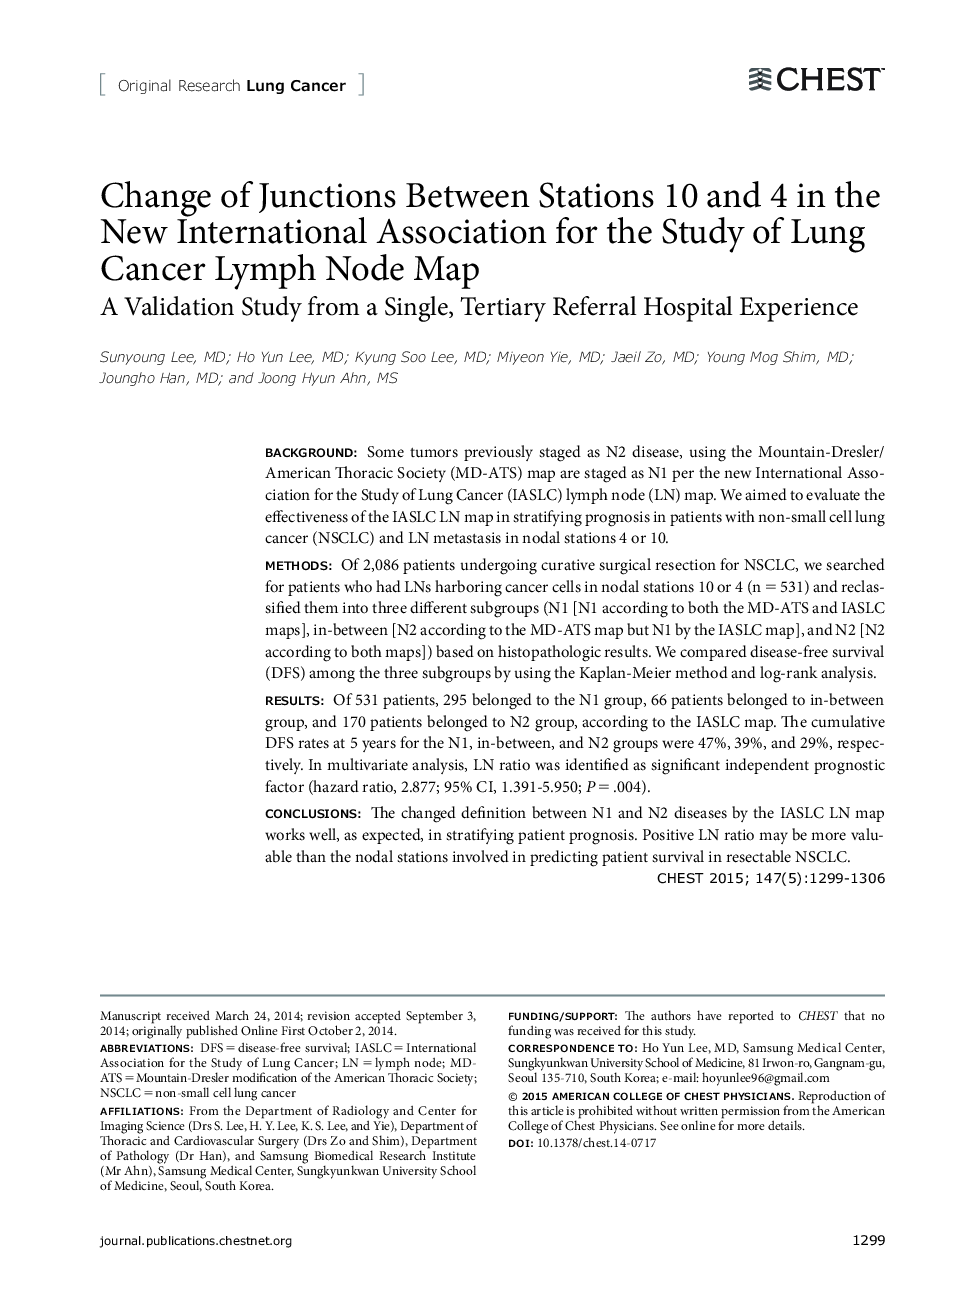 Change of Junctions Between Stations 10 and 4 in the New International Association for the Study of Lung Cancer Lymph Node Map